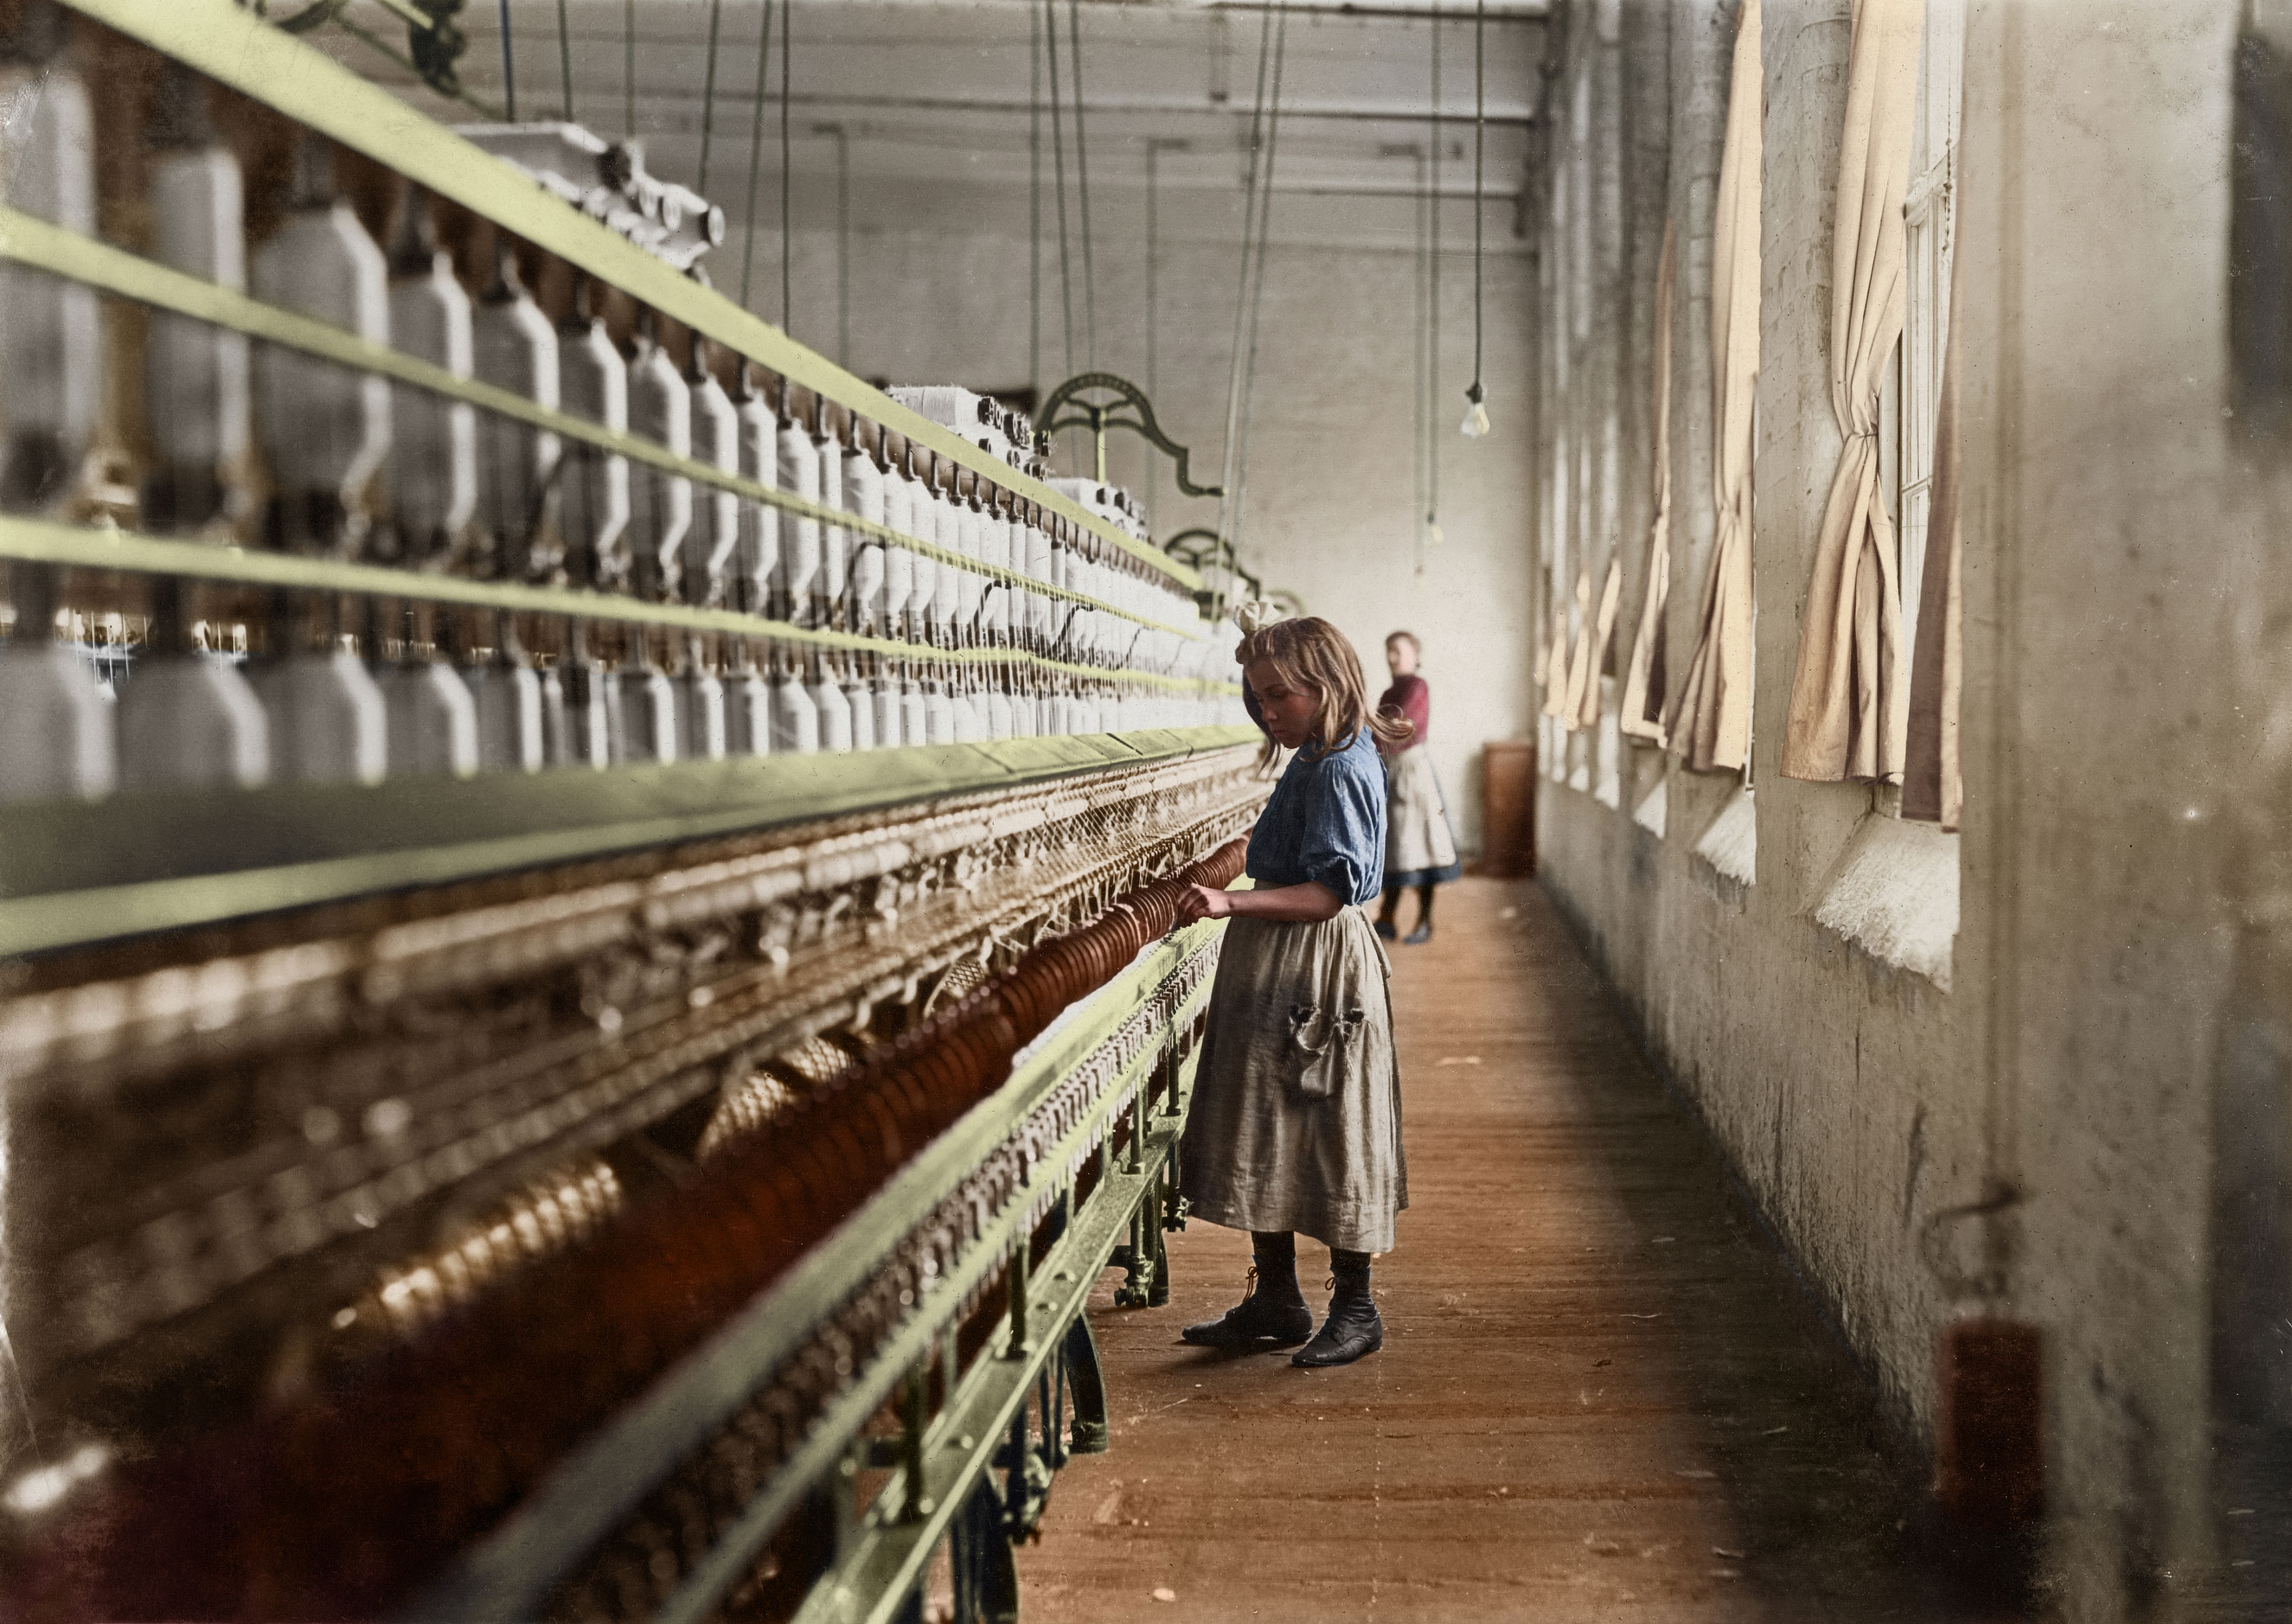 Sadie Pfeifer, 48 inches high, has worked half a year. One of the many small children at work in Lancaster Cotton Mills. Nov. 1908. Lancaster, South Carolina.